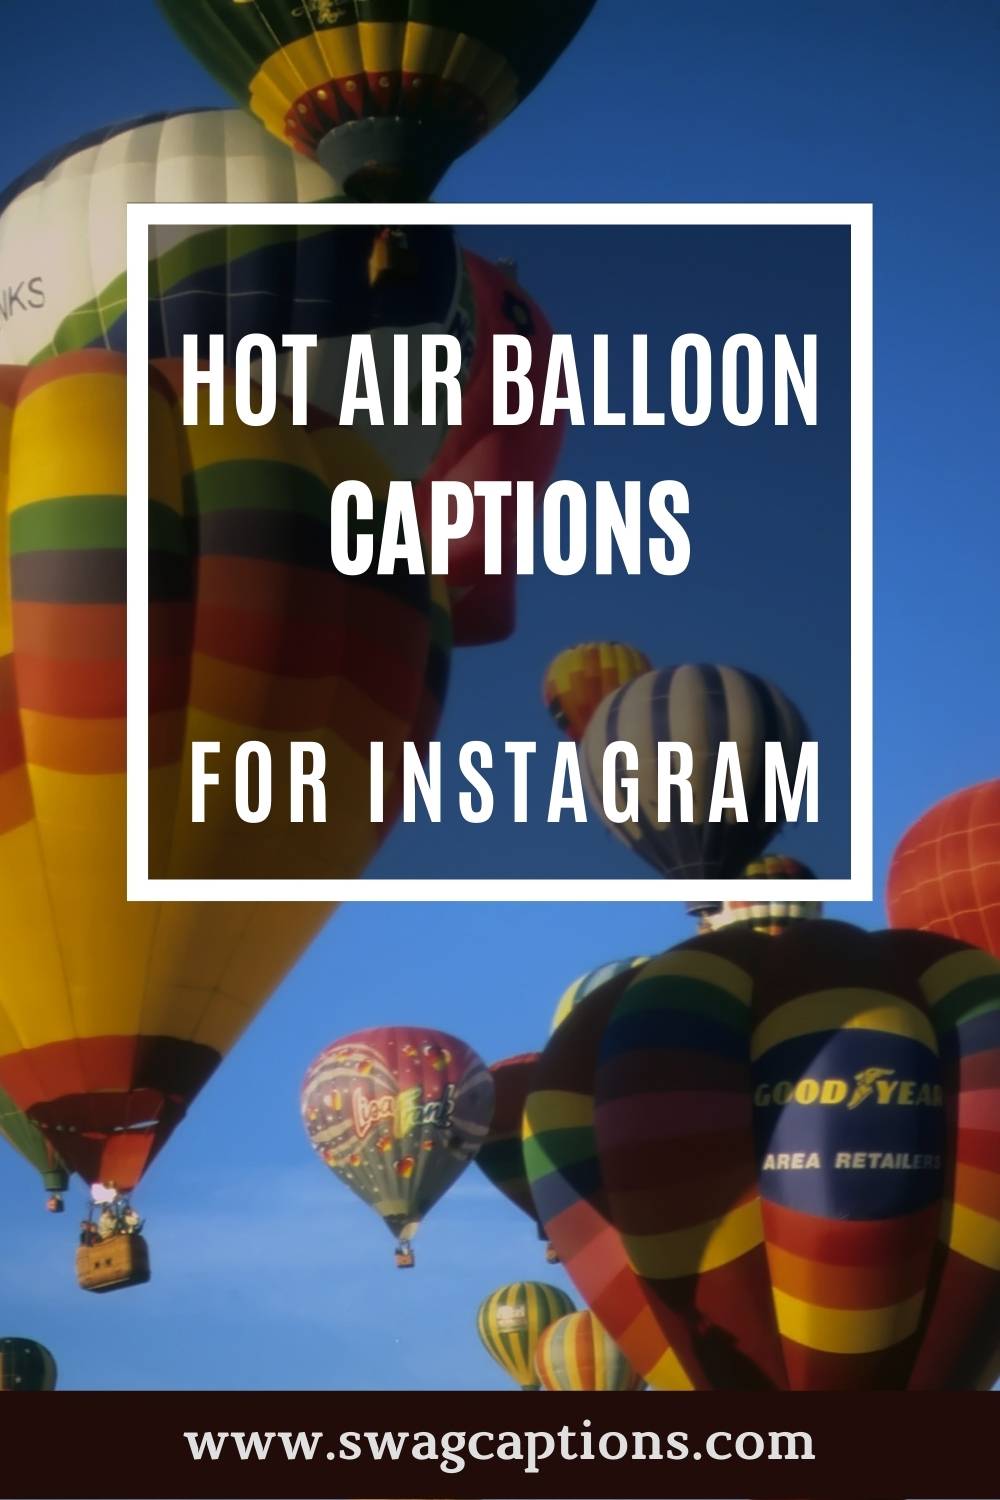 hot air balloon captions for Instagram